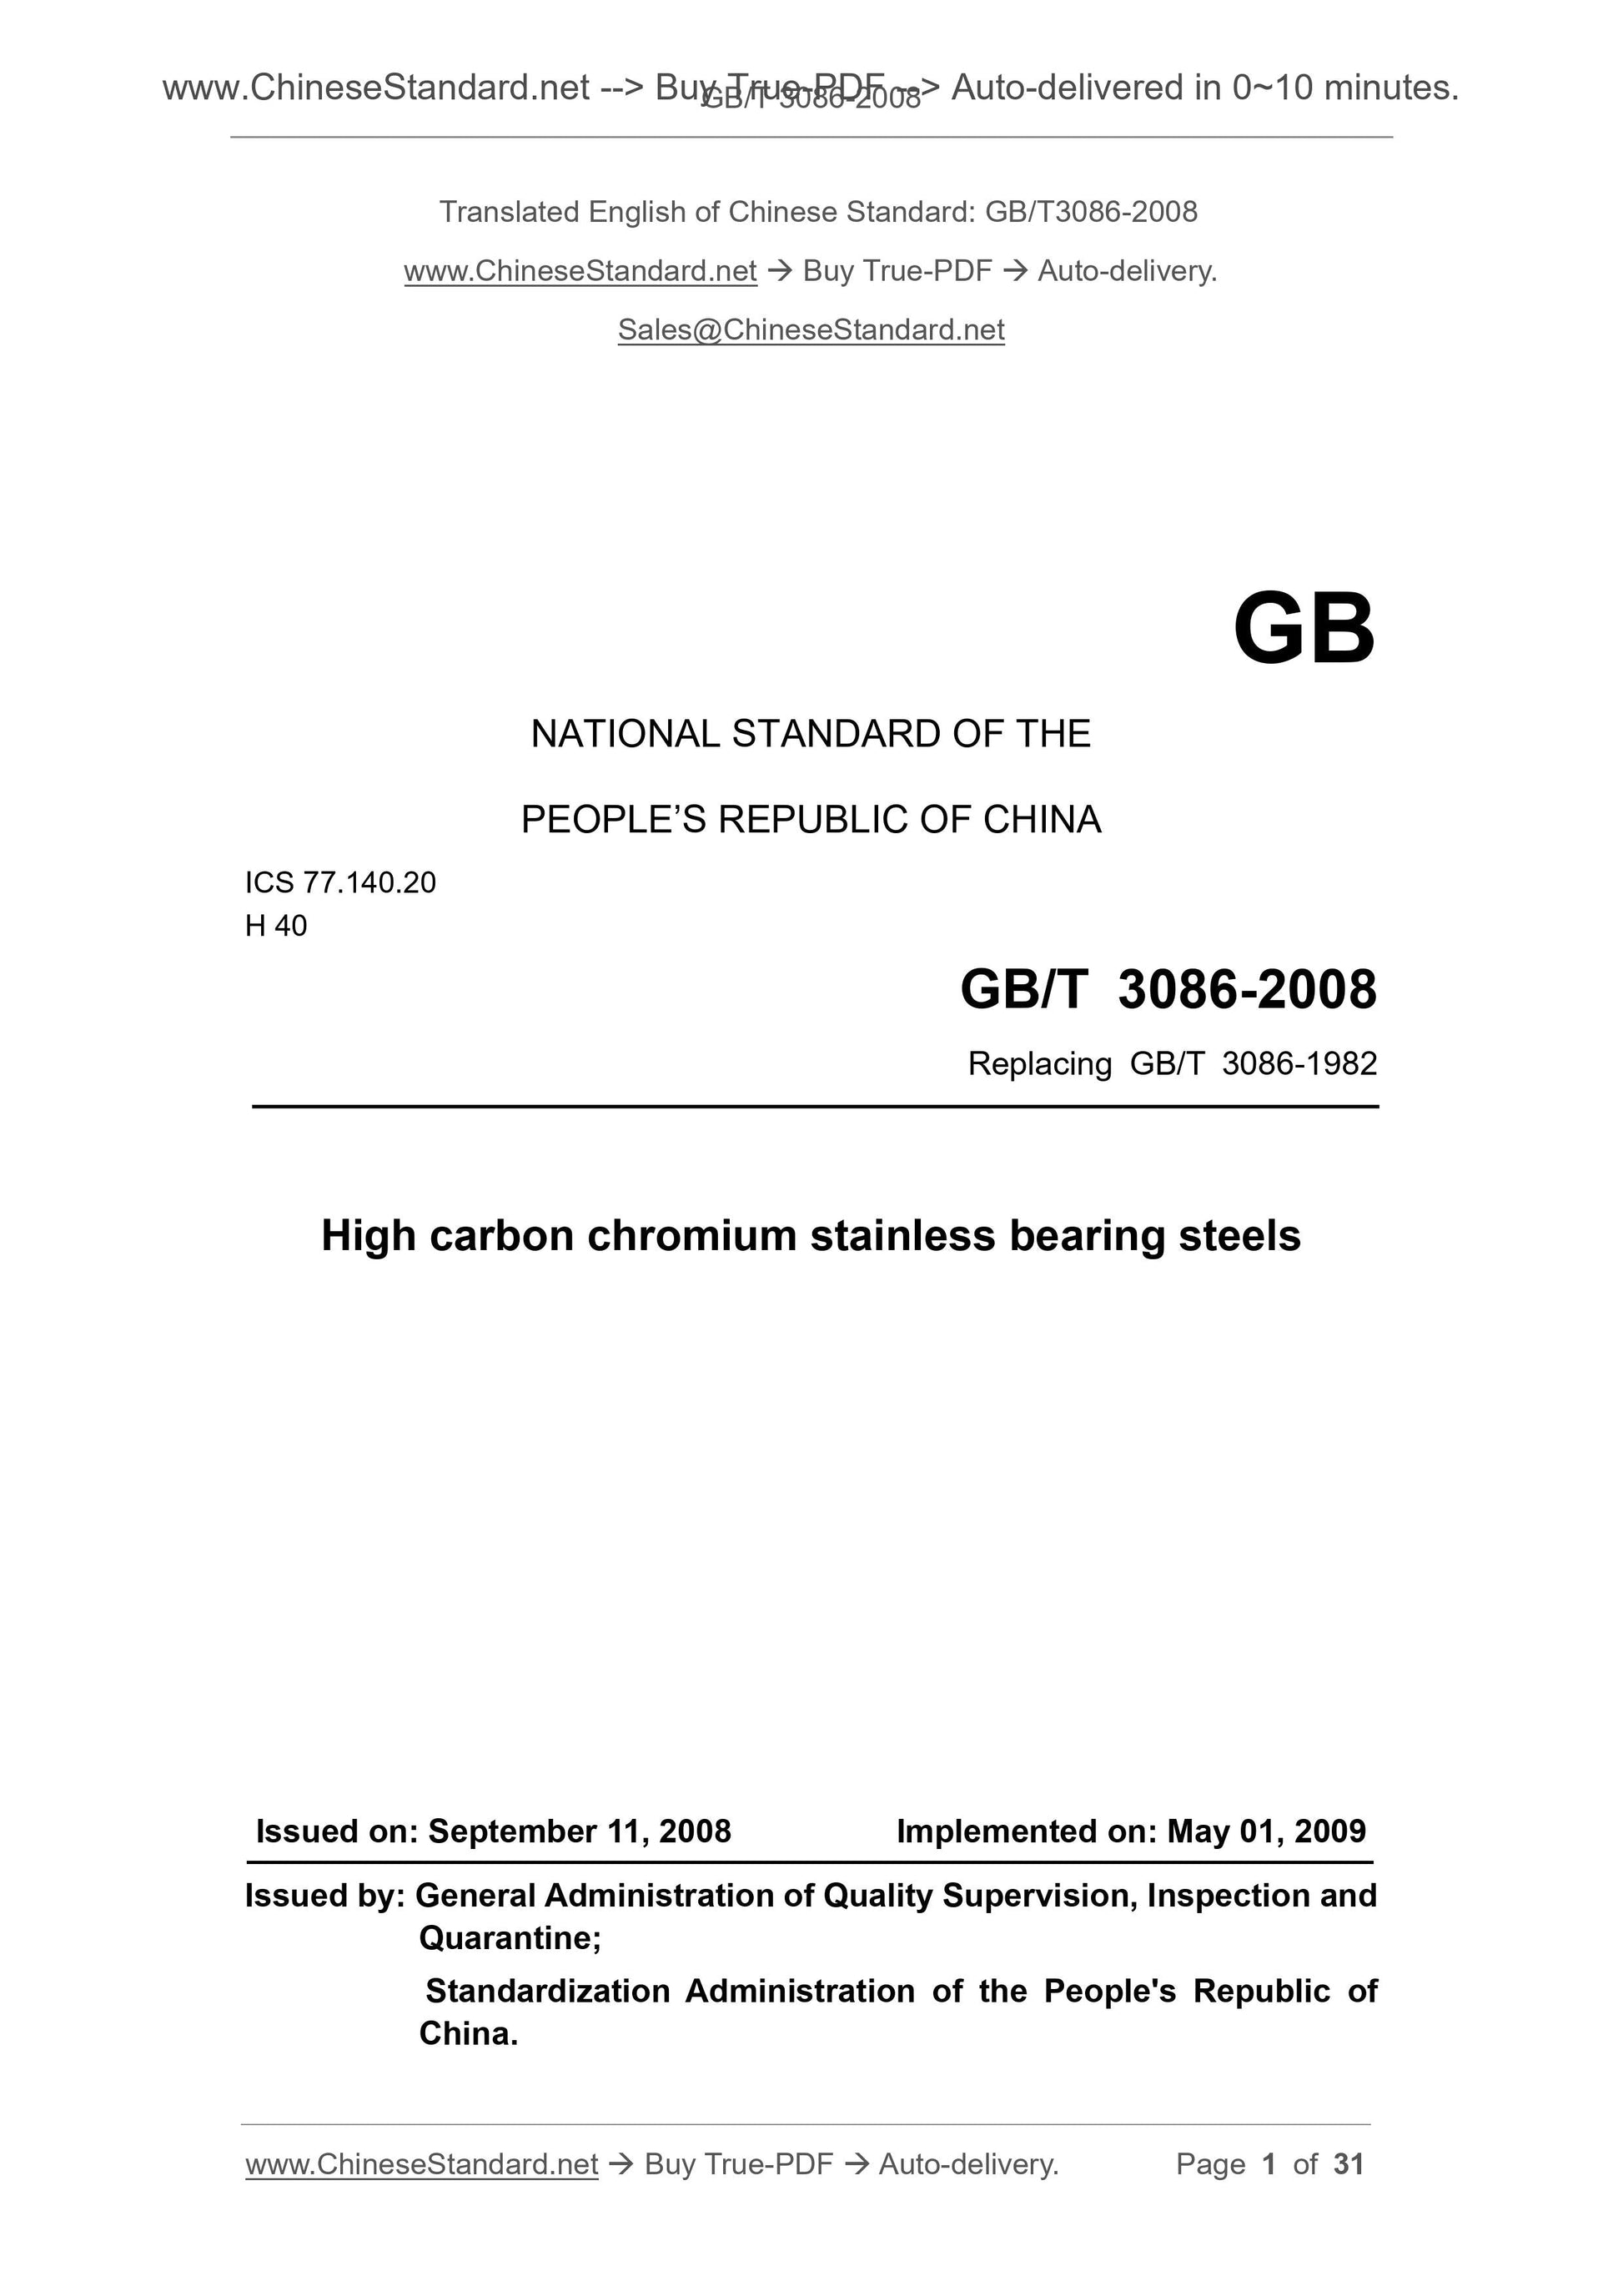 GB/T 3086-2008 Page 1